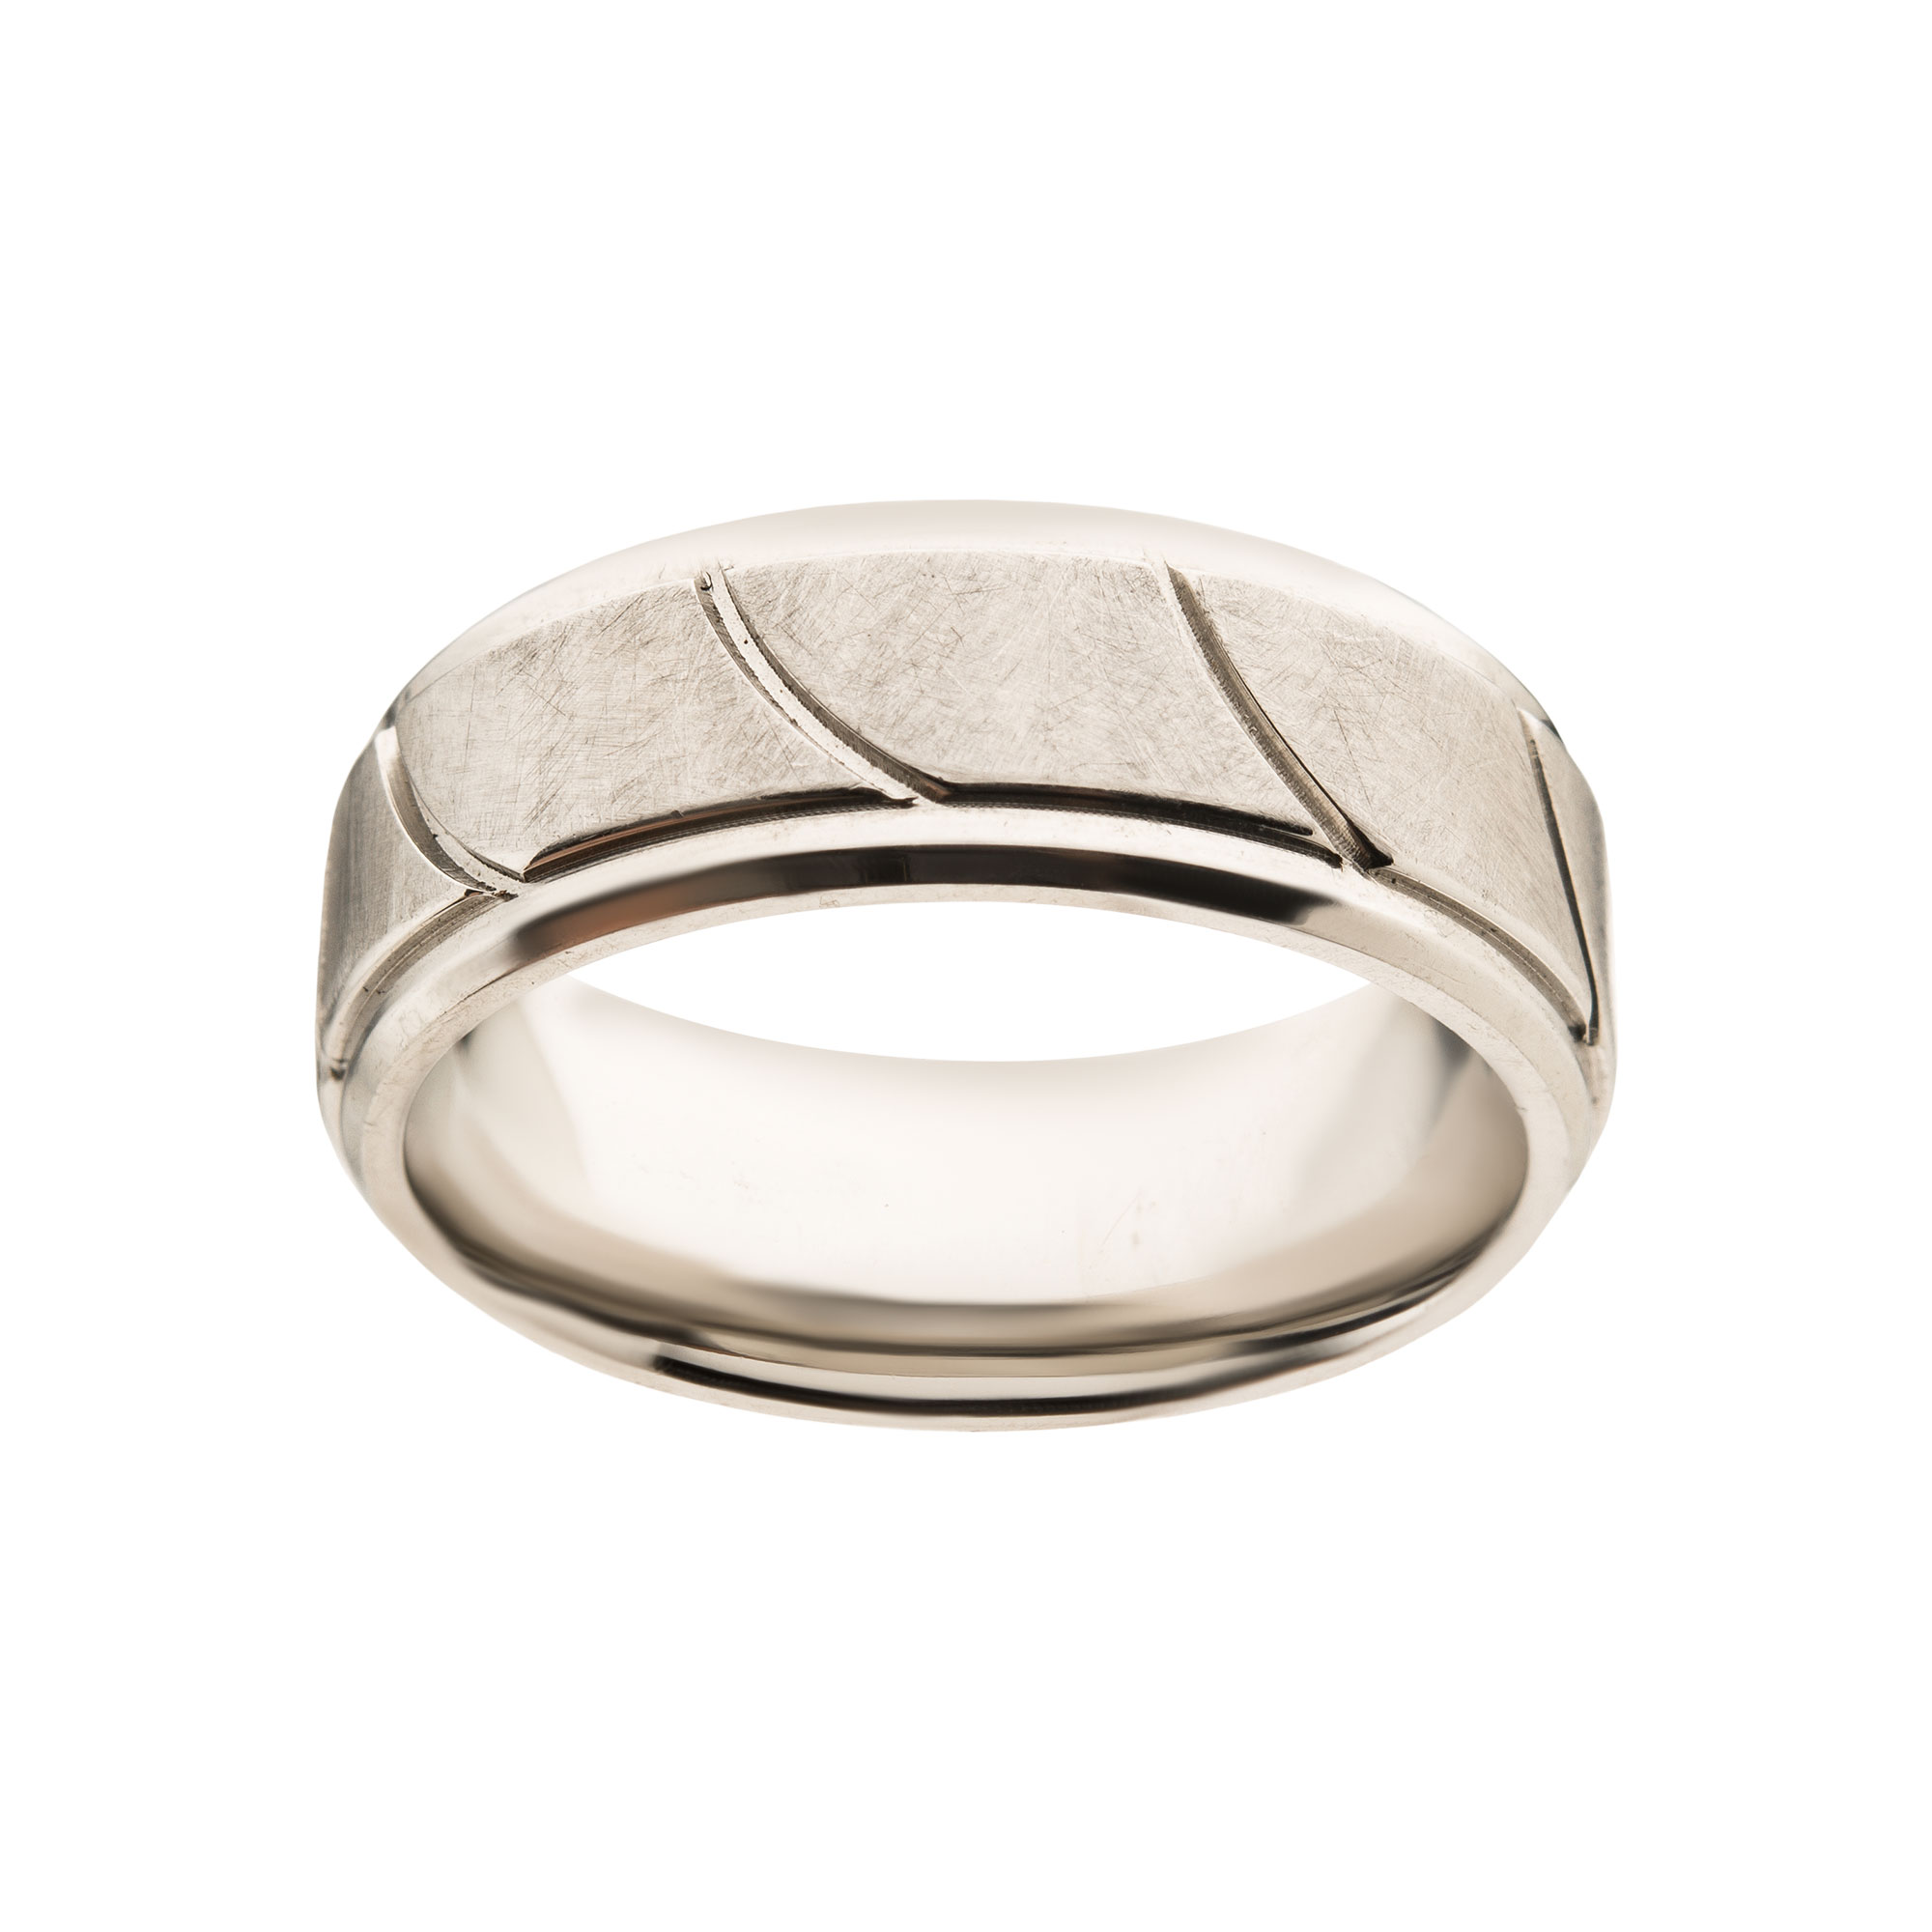 Steel Brushed with Grooves Beveled Ring Image 2 Lewis Jewelers, Inc. Ansonia, CT